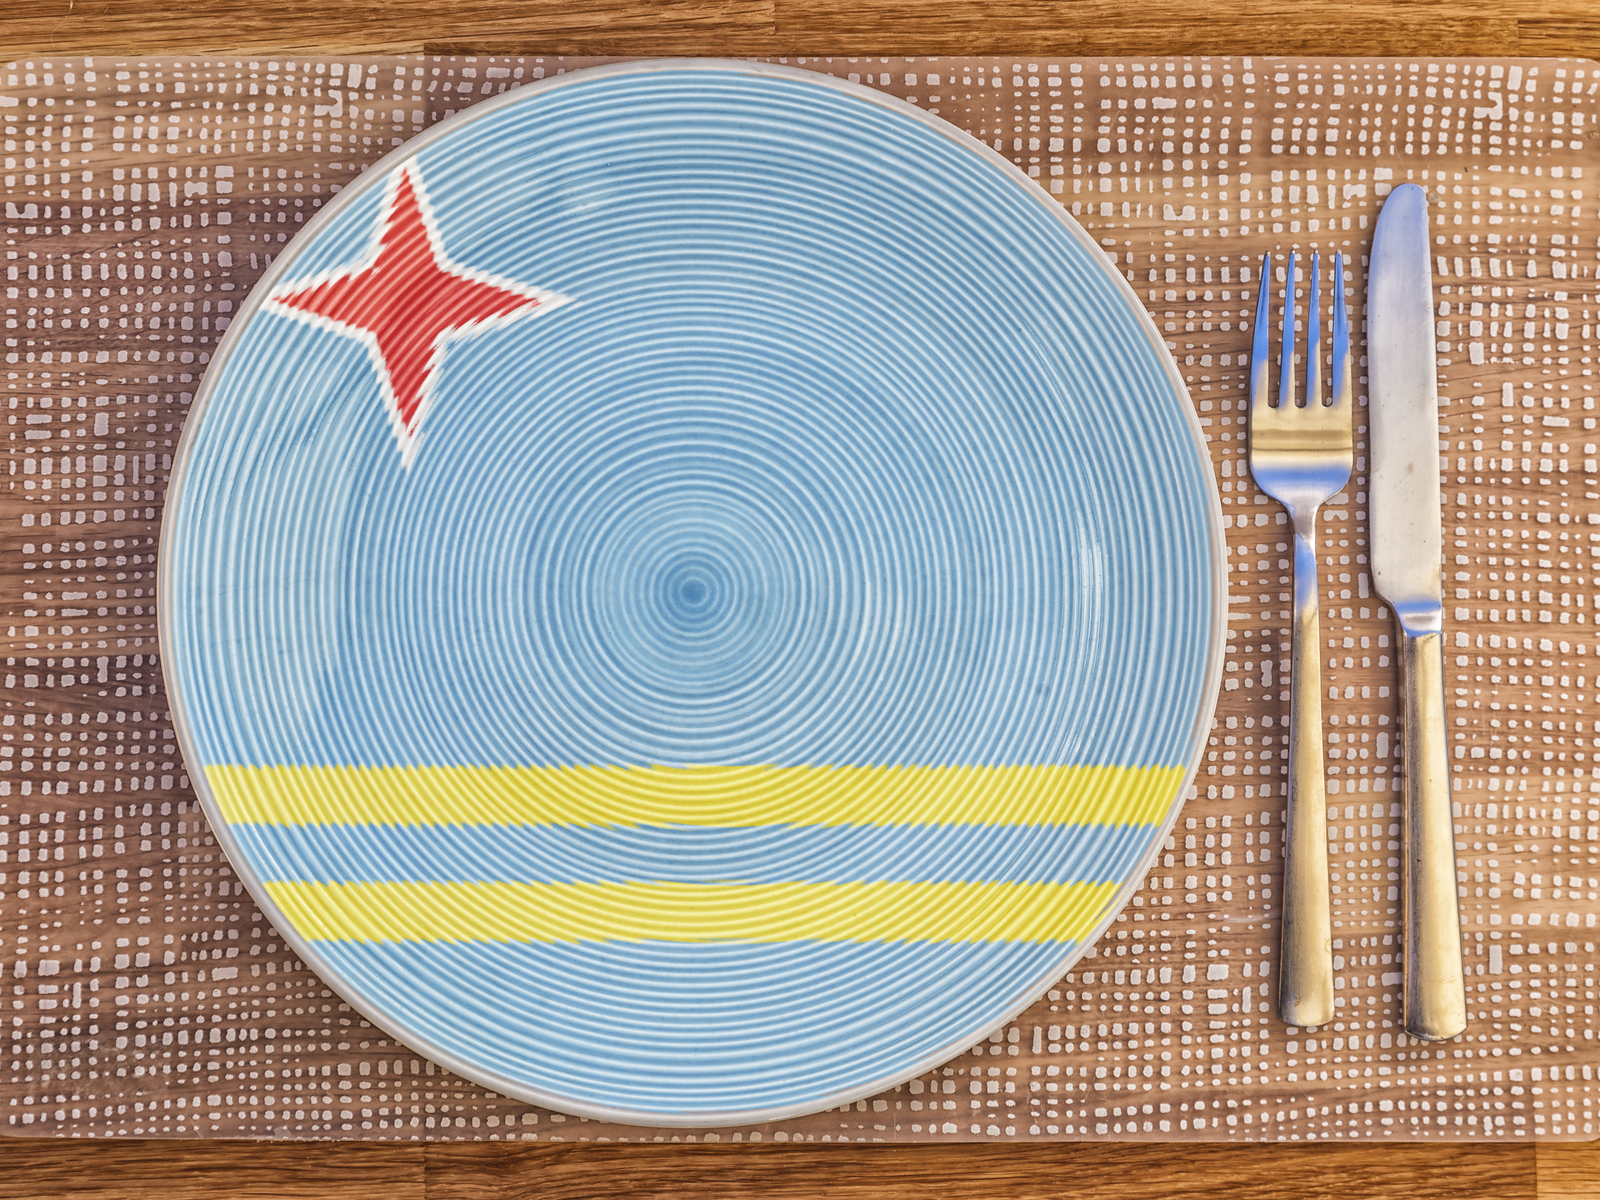 Photo of a dinner plate with the Aruban flag on the plate and silverware for a roundup of the best restaurants in Aruba